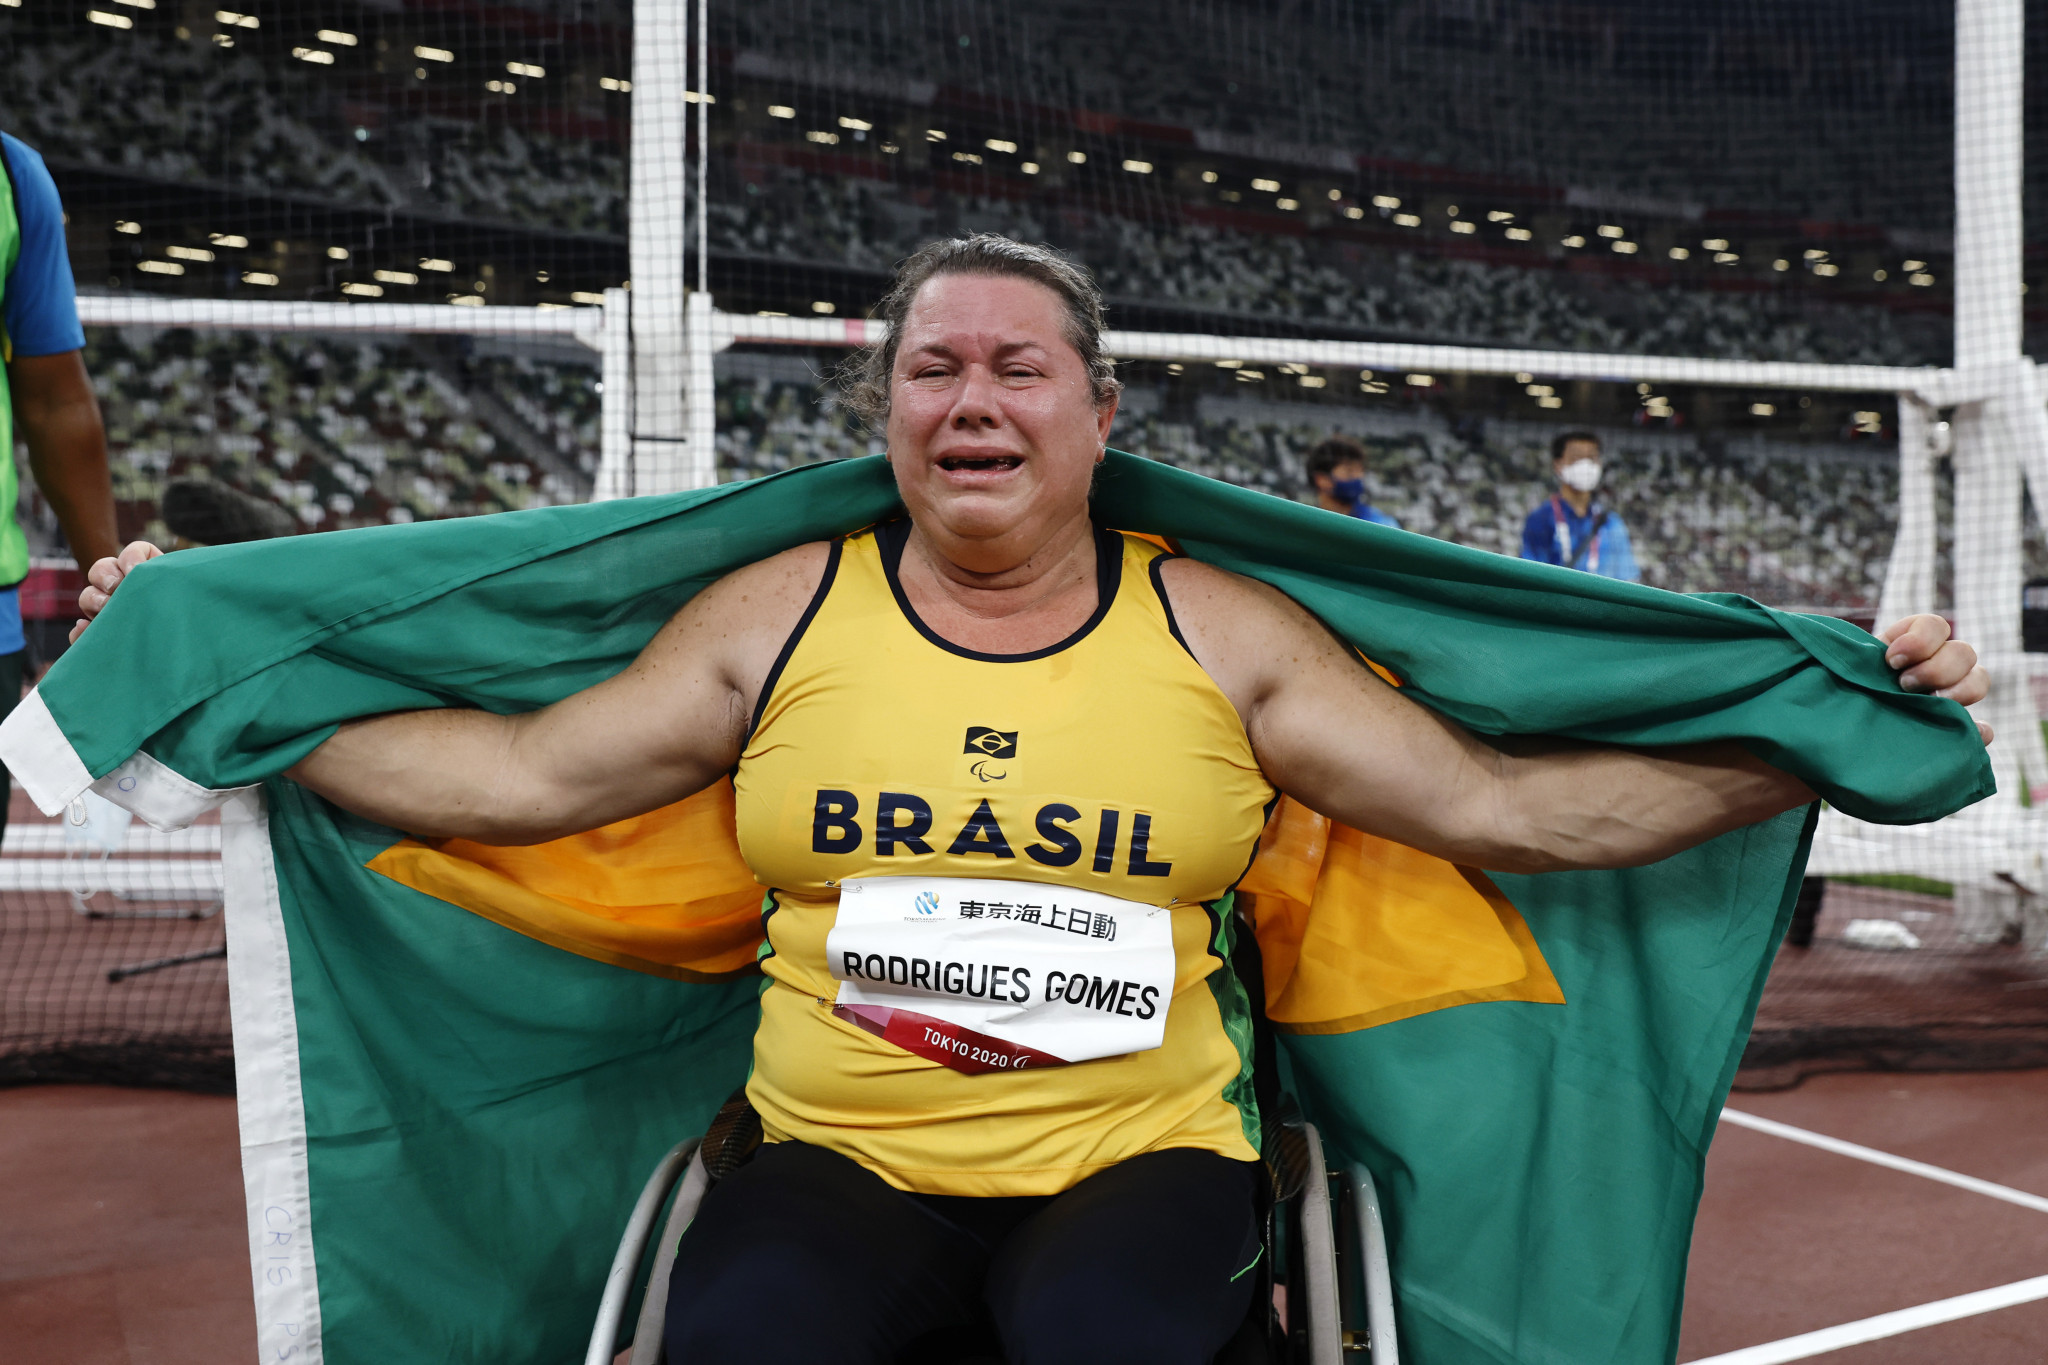 Brazil's Elizabeth Rodrigues Gomes threw 6.51m to break the women's F53 shot put world record in Marrakech ©Getty Images